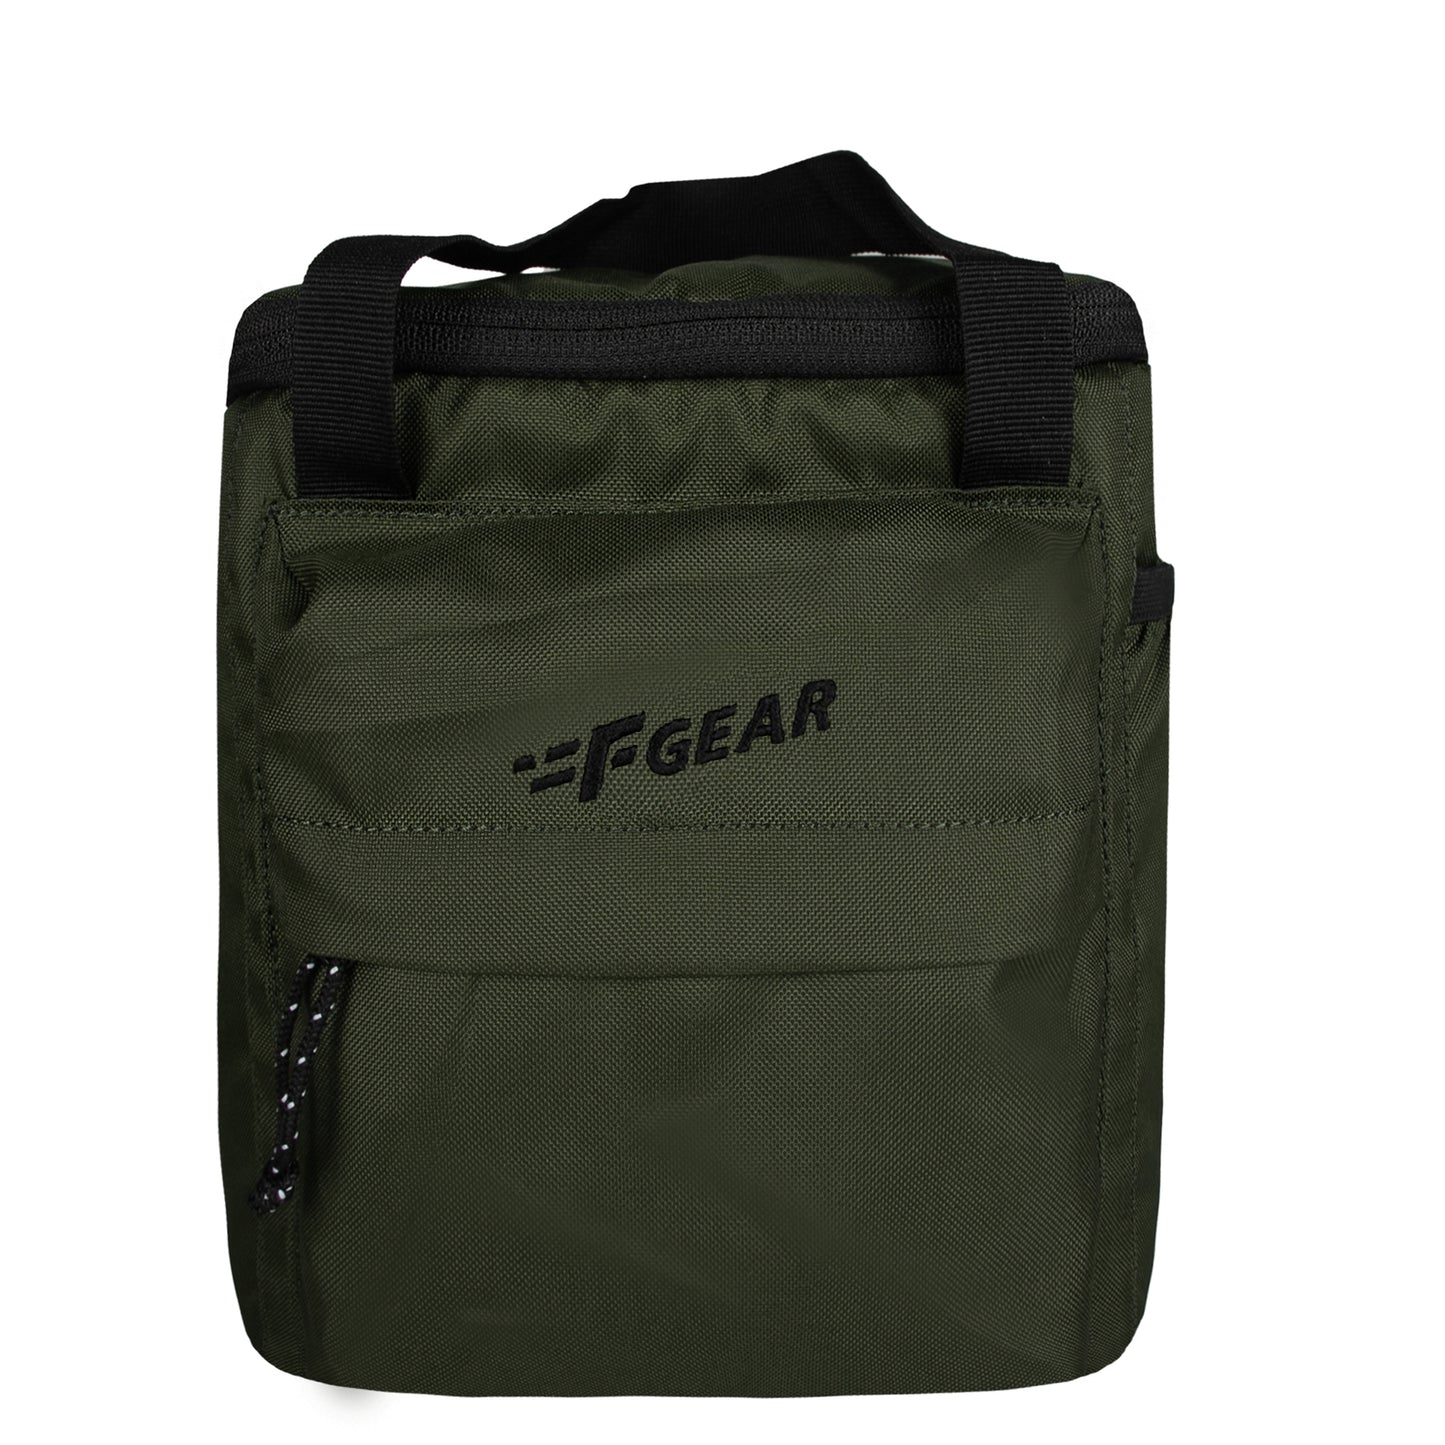 Hoover 7L Army Green Lunch Bag